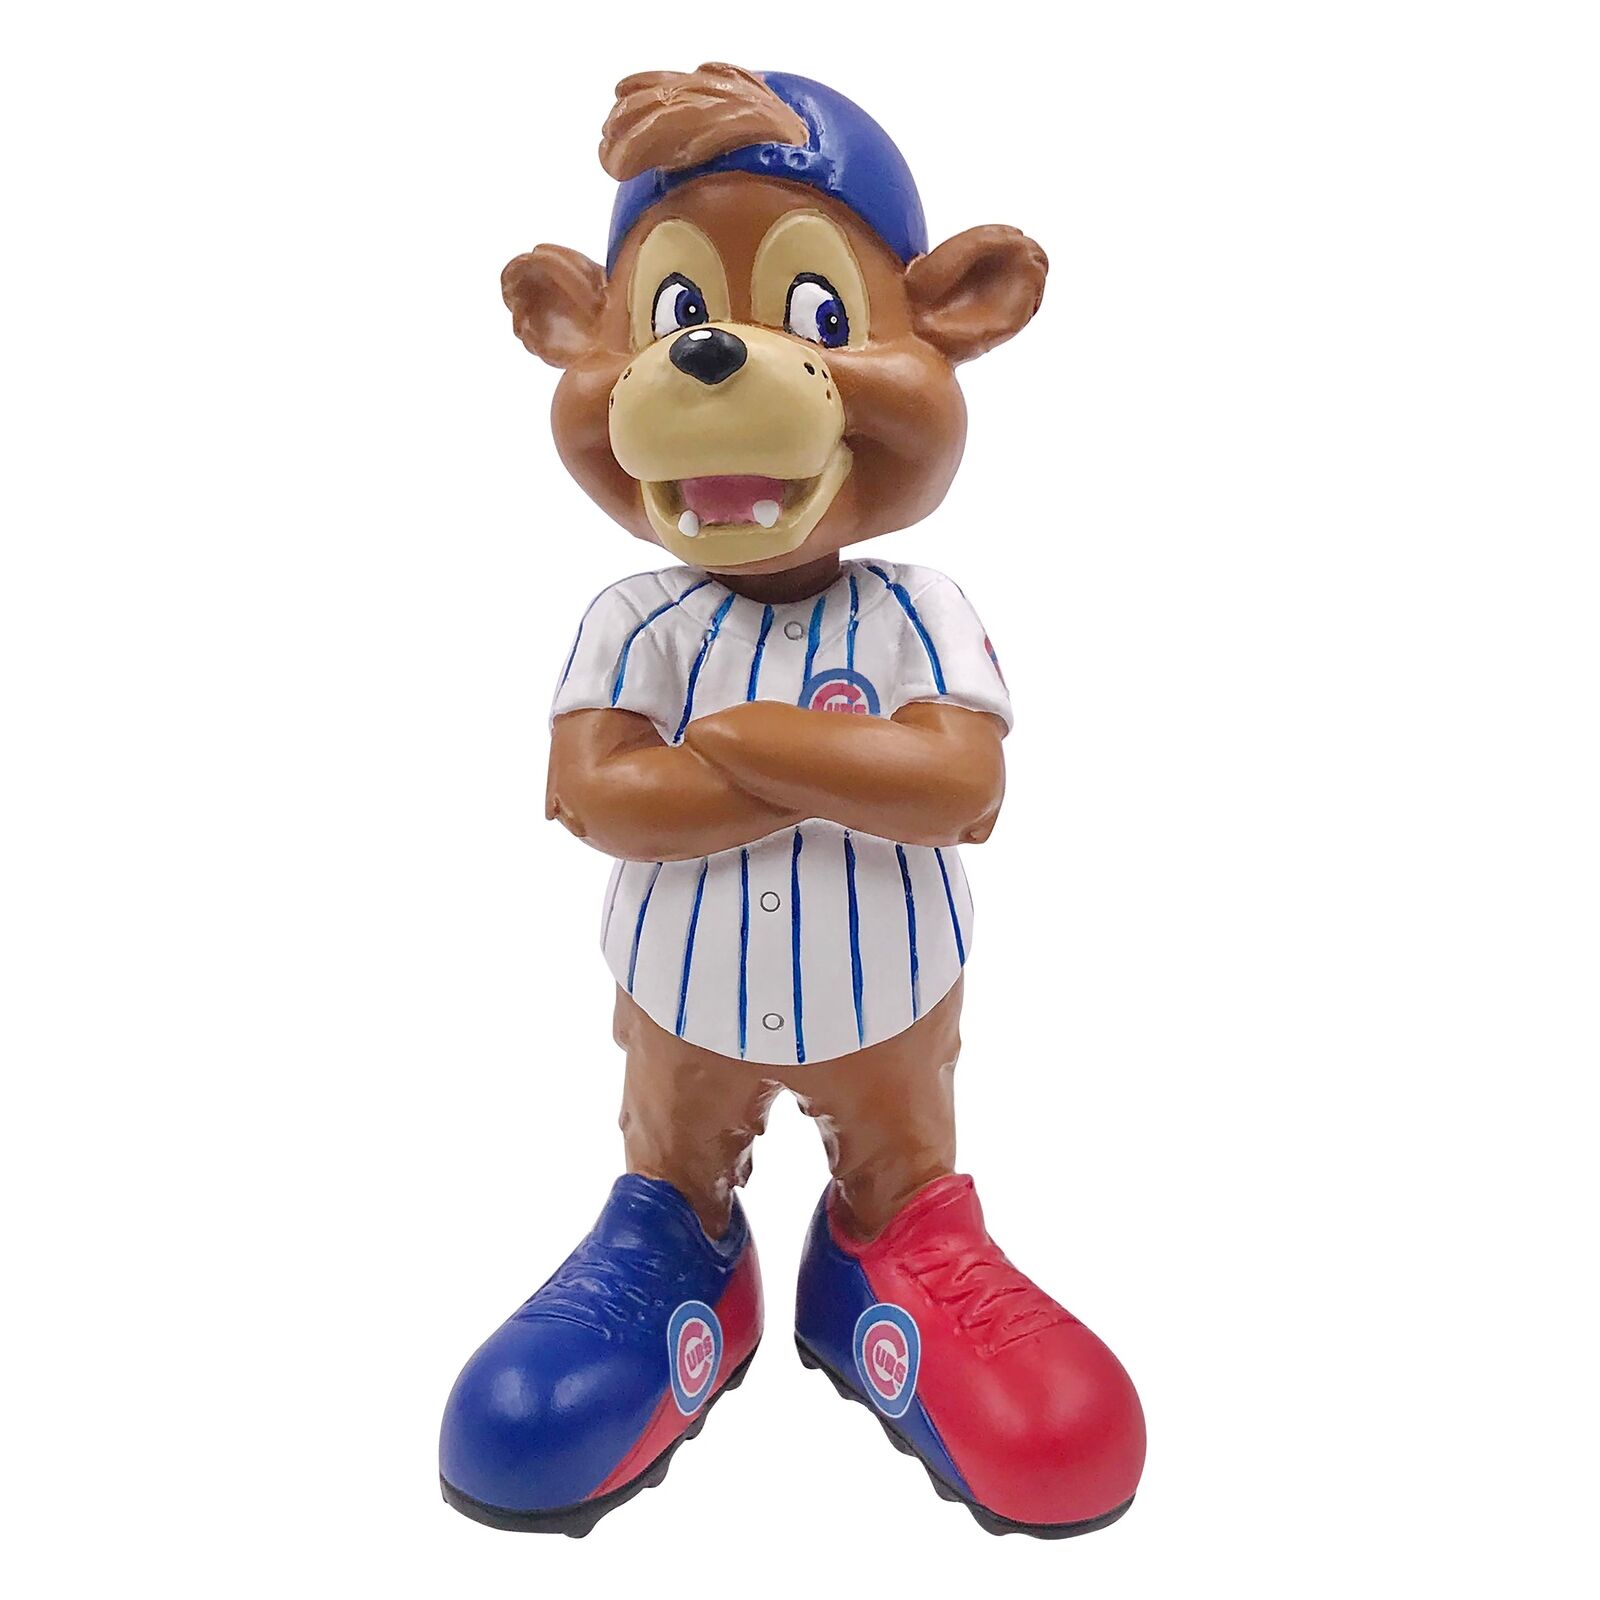 Clark the Cub Chicago Cubs Showstomperz 4.5 inch Bobblehead MLB Baseball